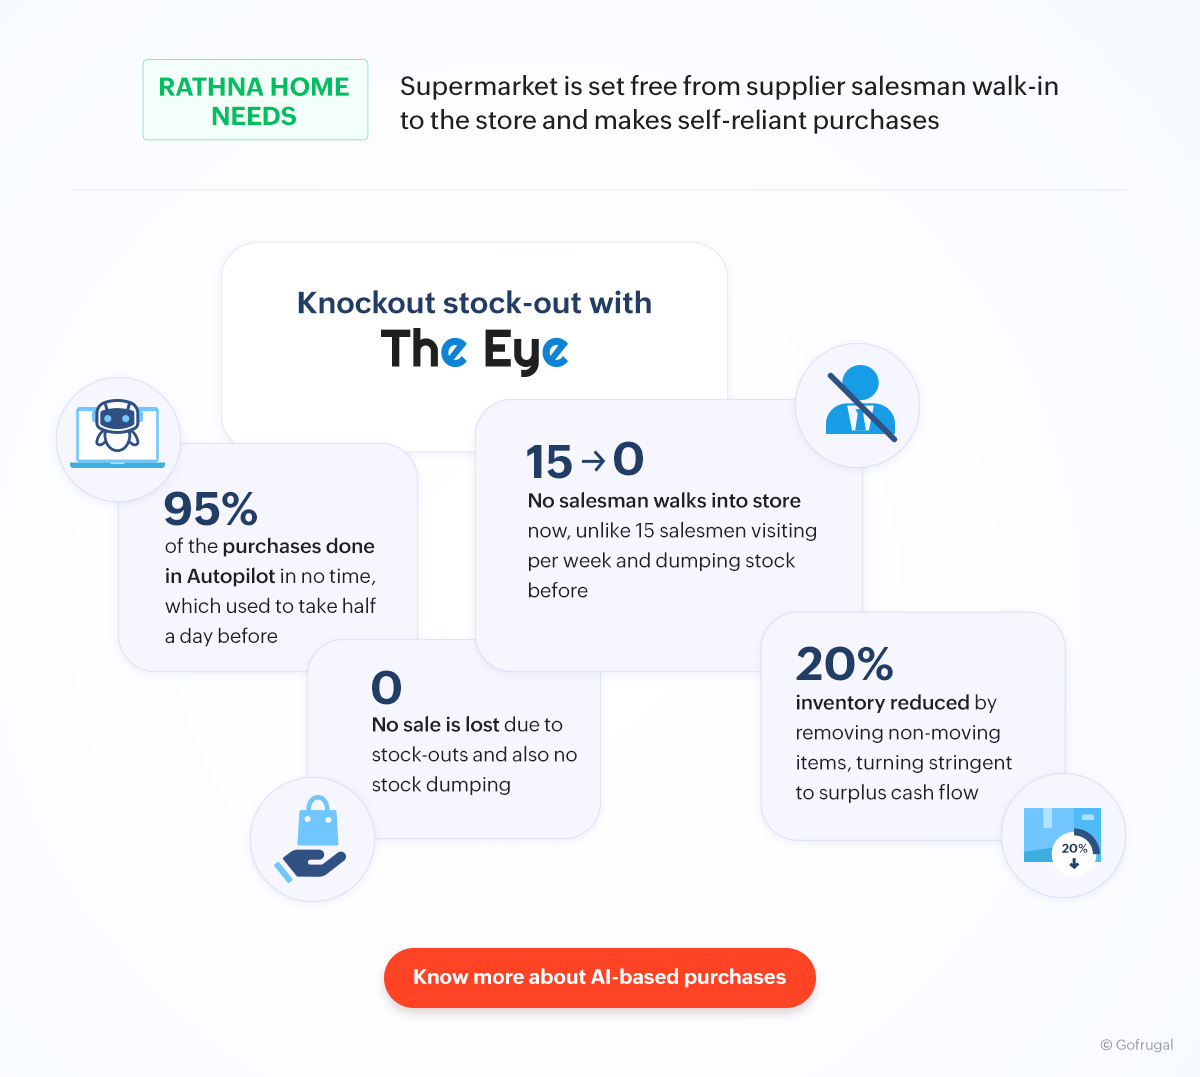 Case study of Rathna Home Needs - Supermarket that is set free from supplier salesman walk-in, eliminated stock-out and makes self-reliant autonomous purchases without any human intervention using The Eye